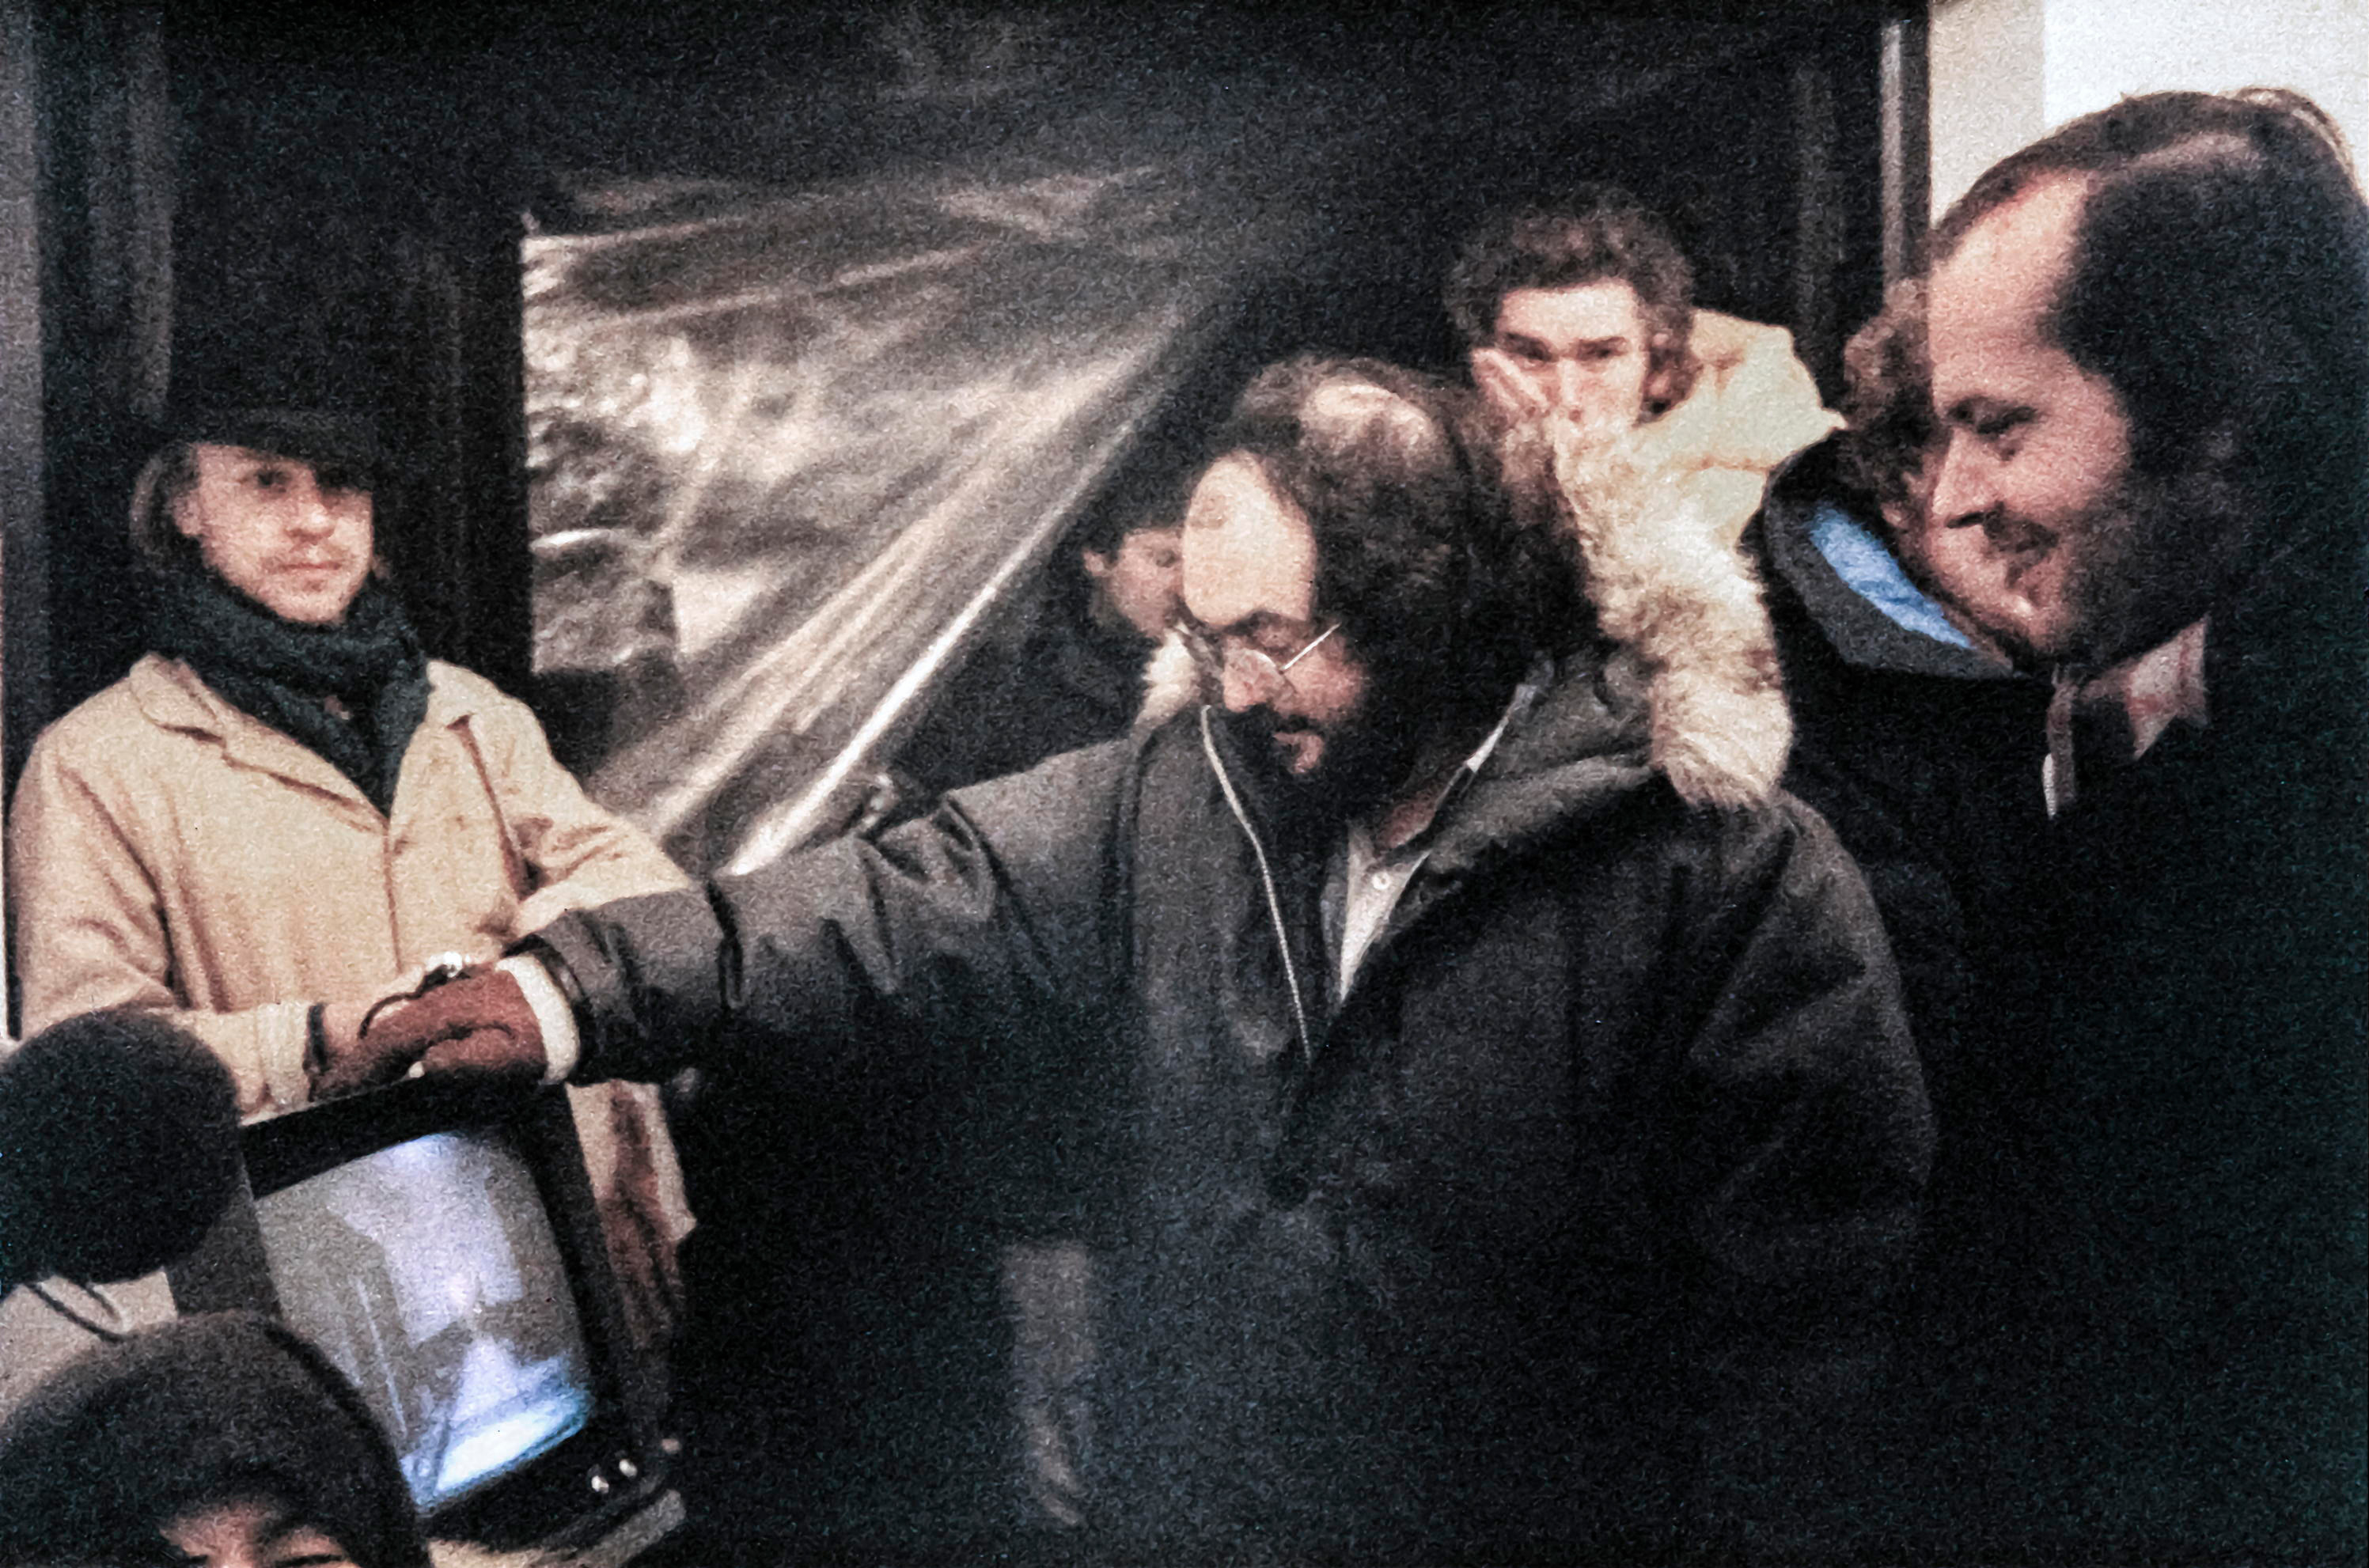 A group of men in winter coats watch a monitor